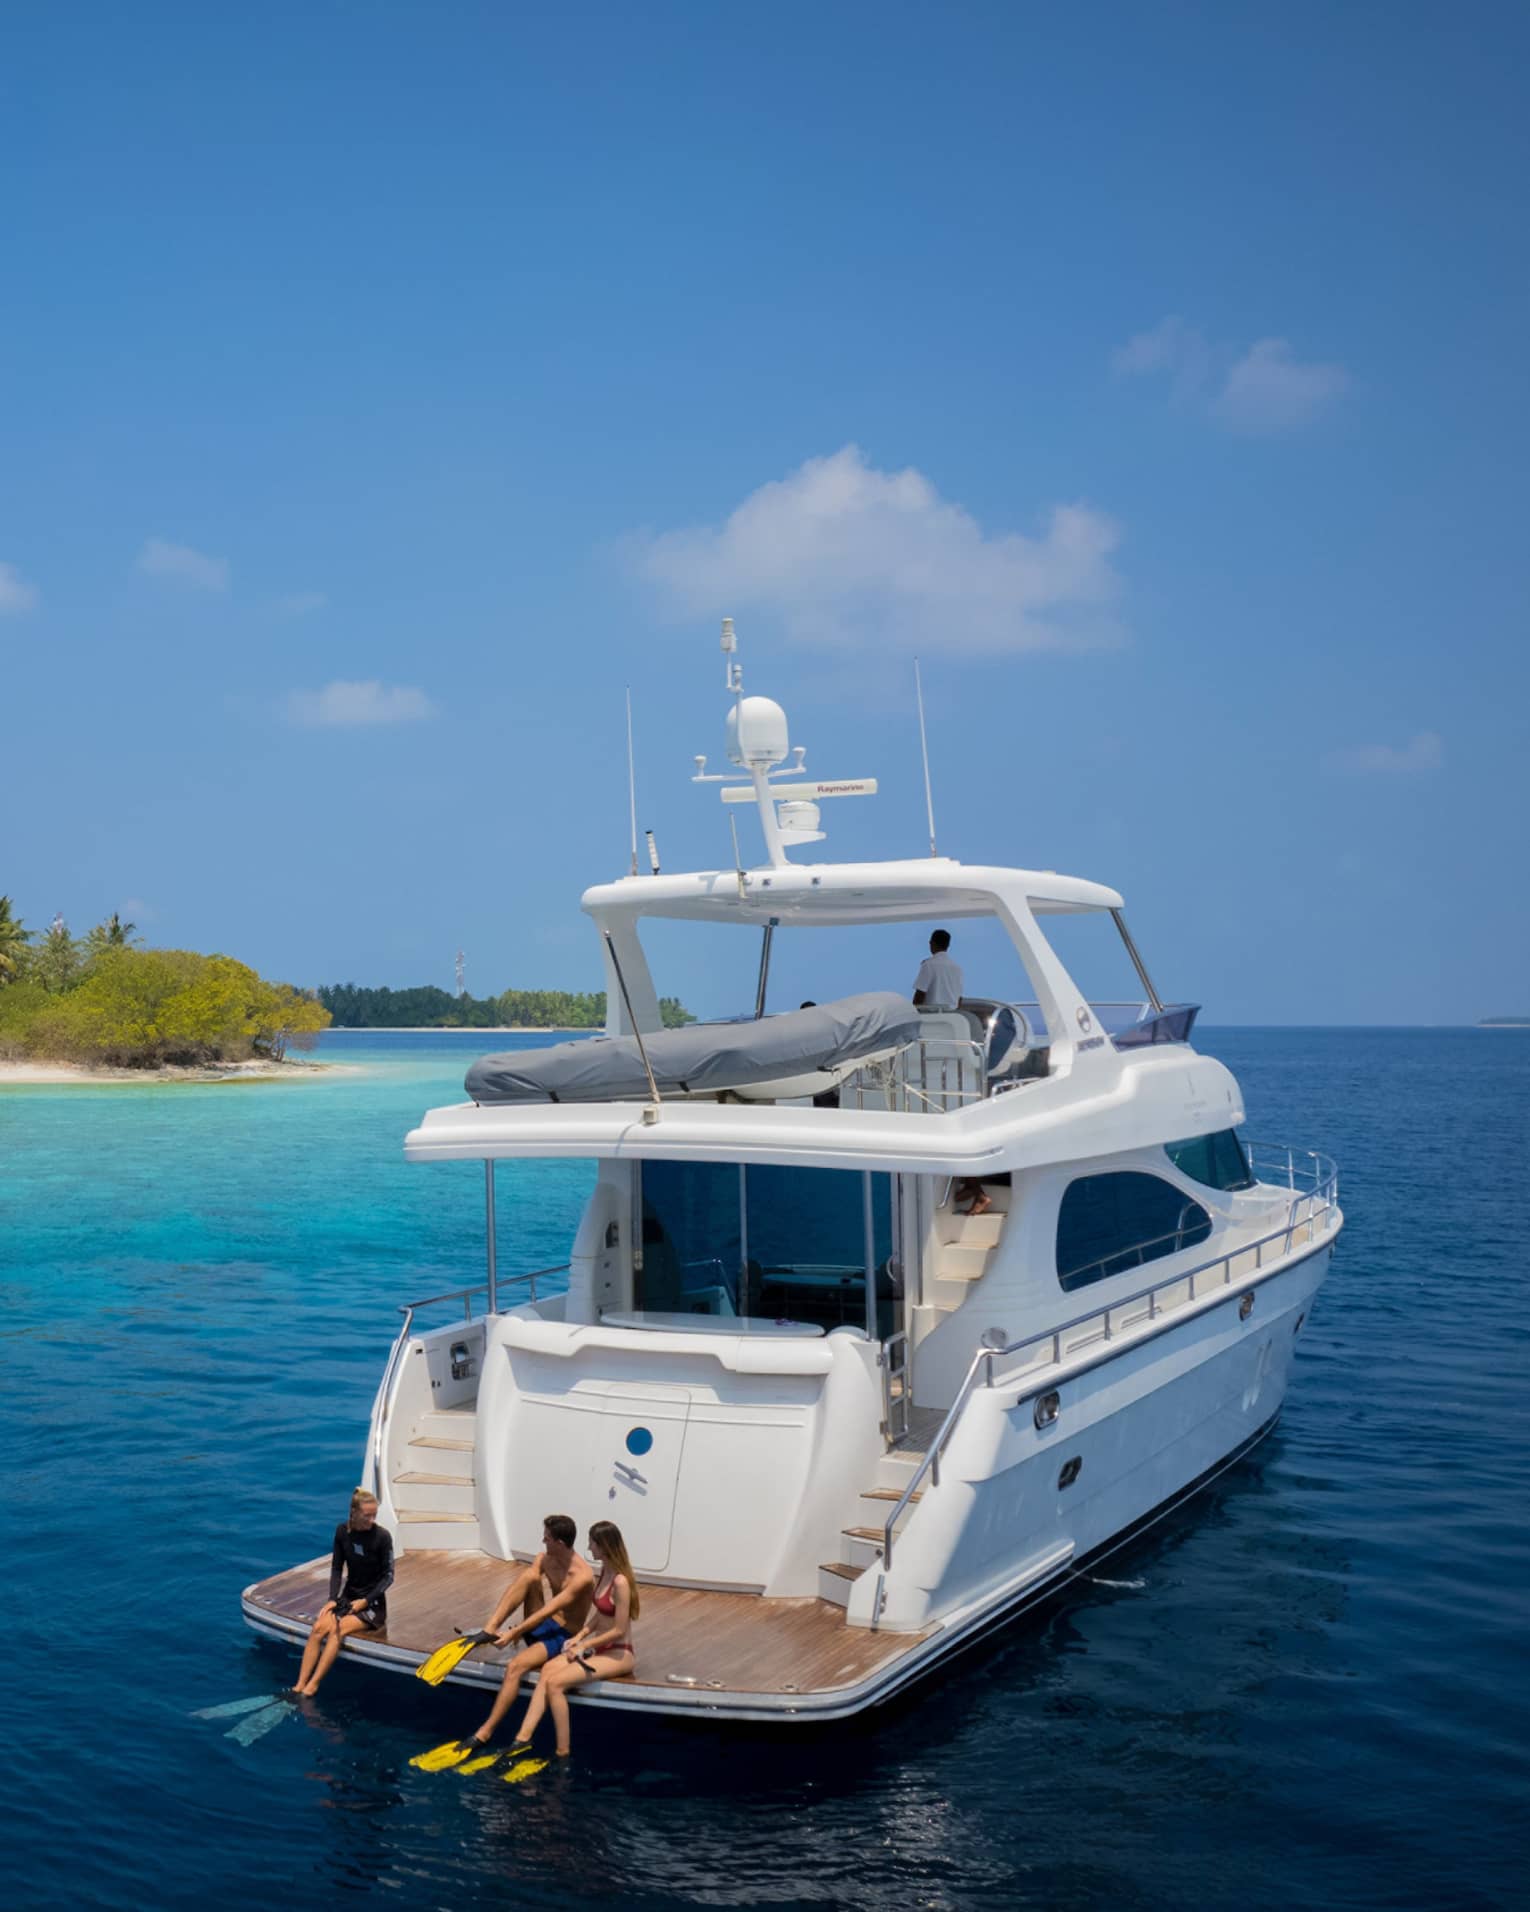 A couple sit with a marine biologist at the rear of a yacht, preparing to snorkel in smooth ocean water amid lush islands.